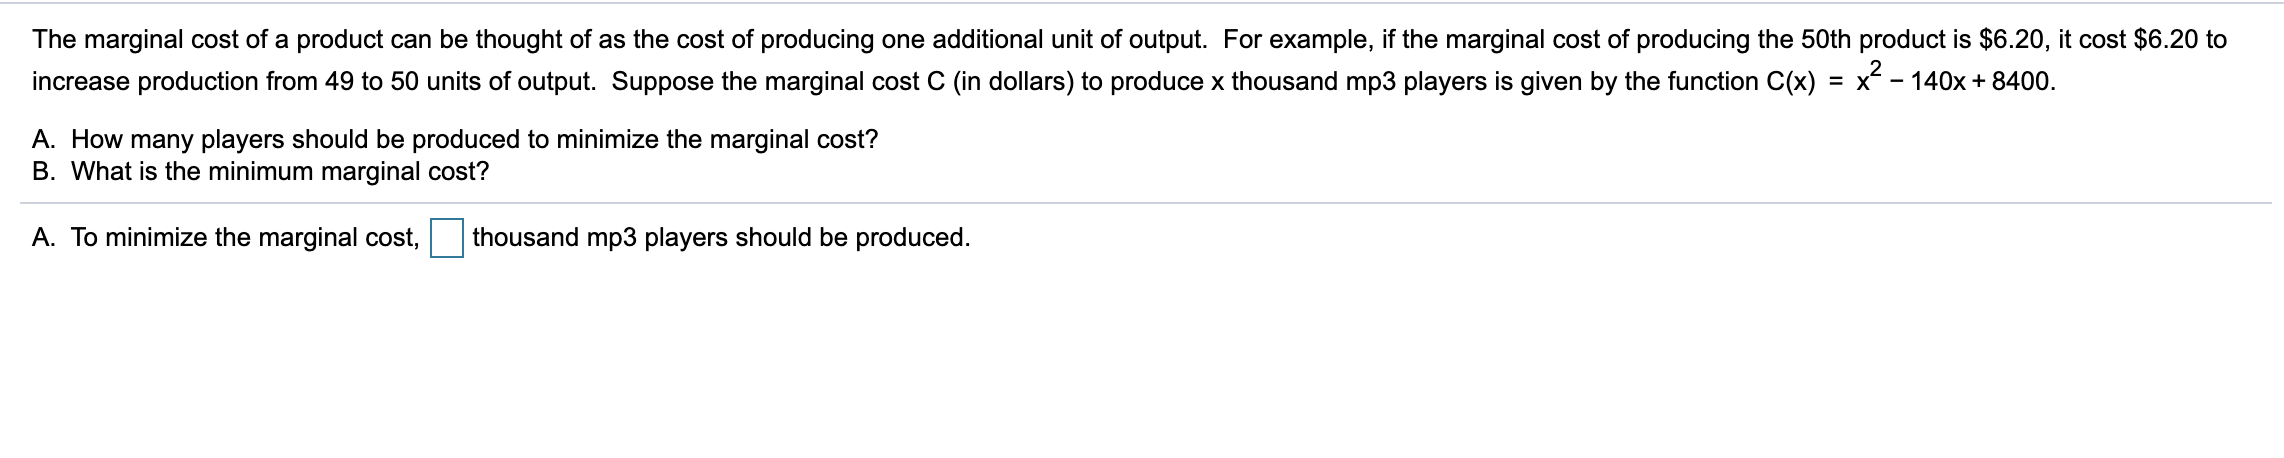 The marginal cost of a product can be thought of as the cost of producing one additional unit of output. For example, if the marginal cost of producing the 50th product is $6.20, it cost $6.20 to
increase production from 49 to 50 units of output. Suppose the marginal cost C (in dollars) to produce x thousand mp3 players is given by the function C(x) = x - 140x + 8400.
A. How many players should be produced to minimize the marginal cost?
B. What is the minimum marginal cost?
A. To minimize the marginal cost,
thousand mp3 players should be produced.
